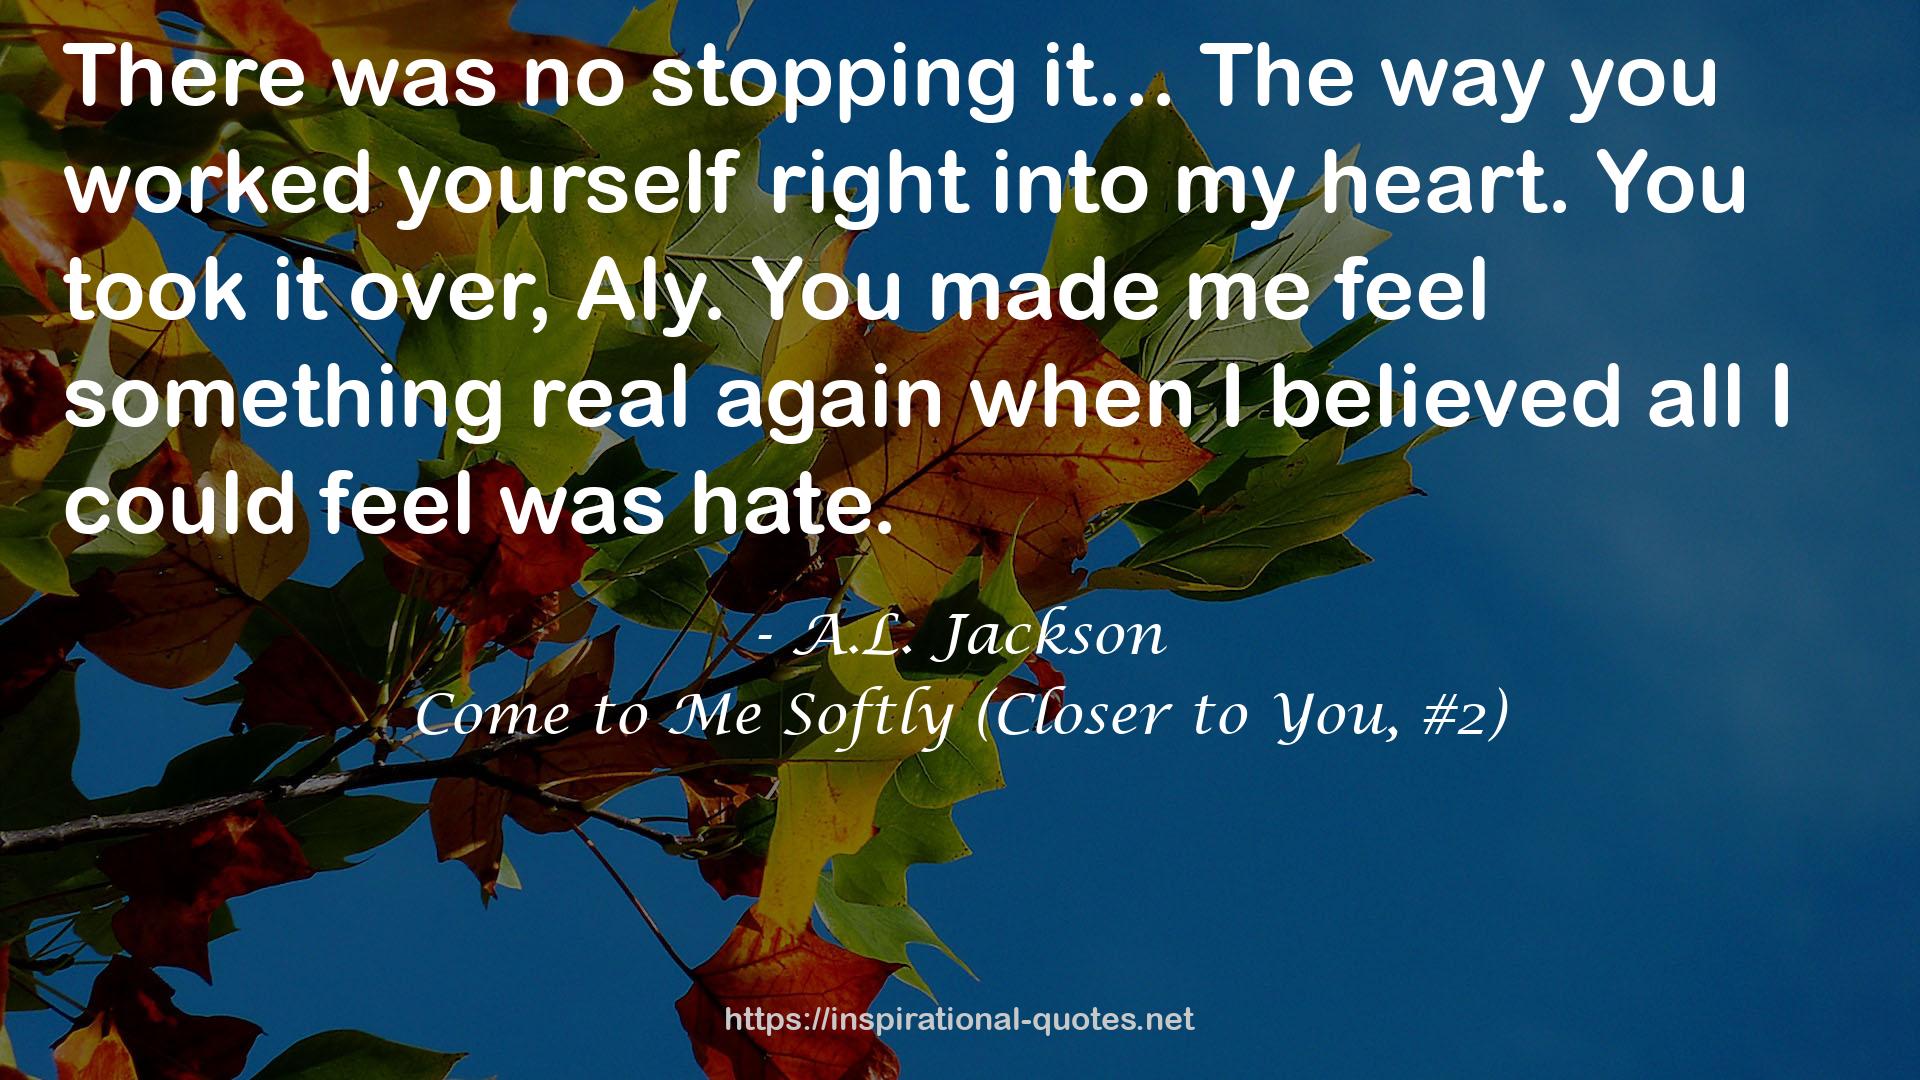 Come to Me Softly (Closer to You, #2) QUOTES